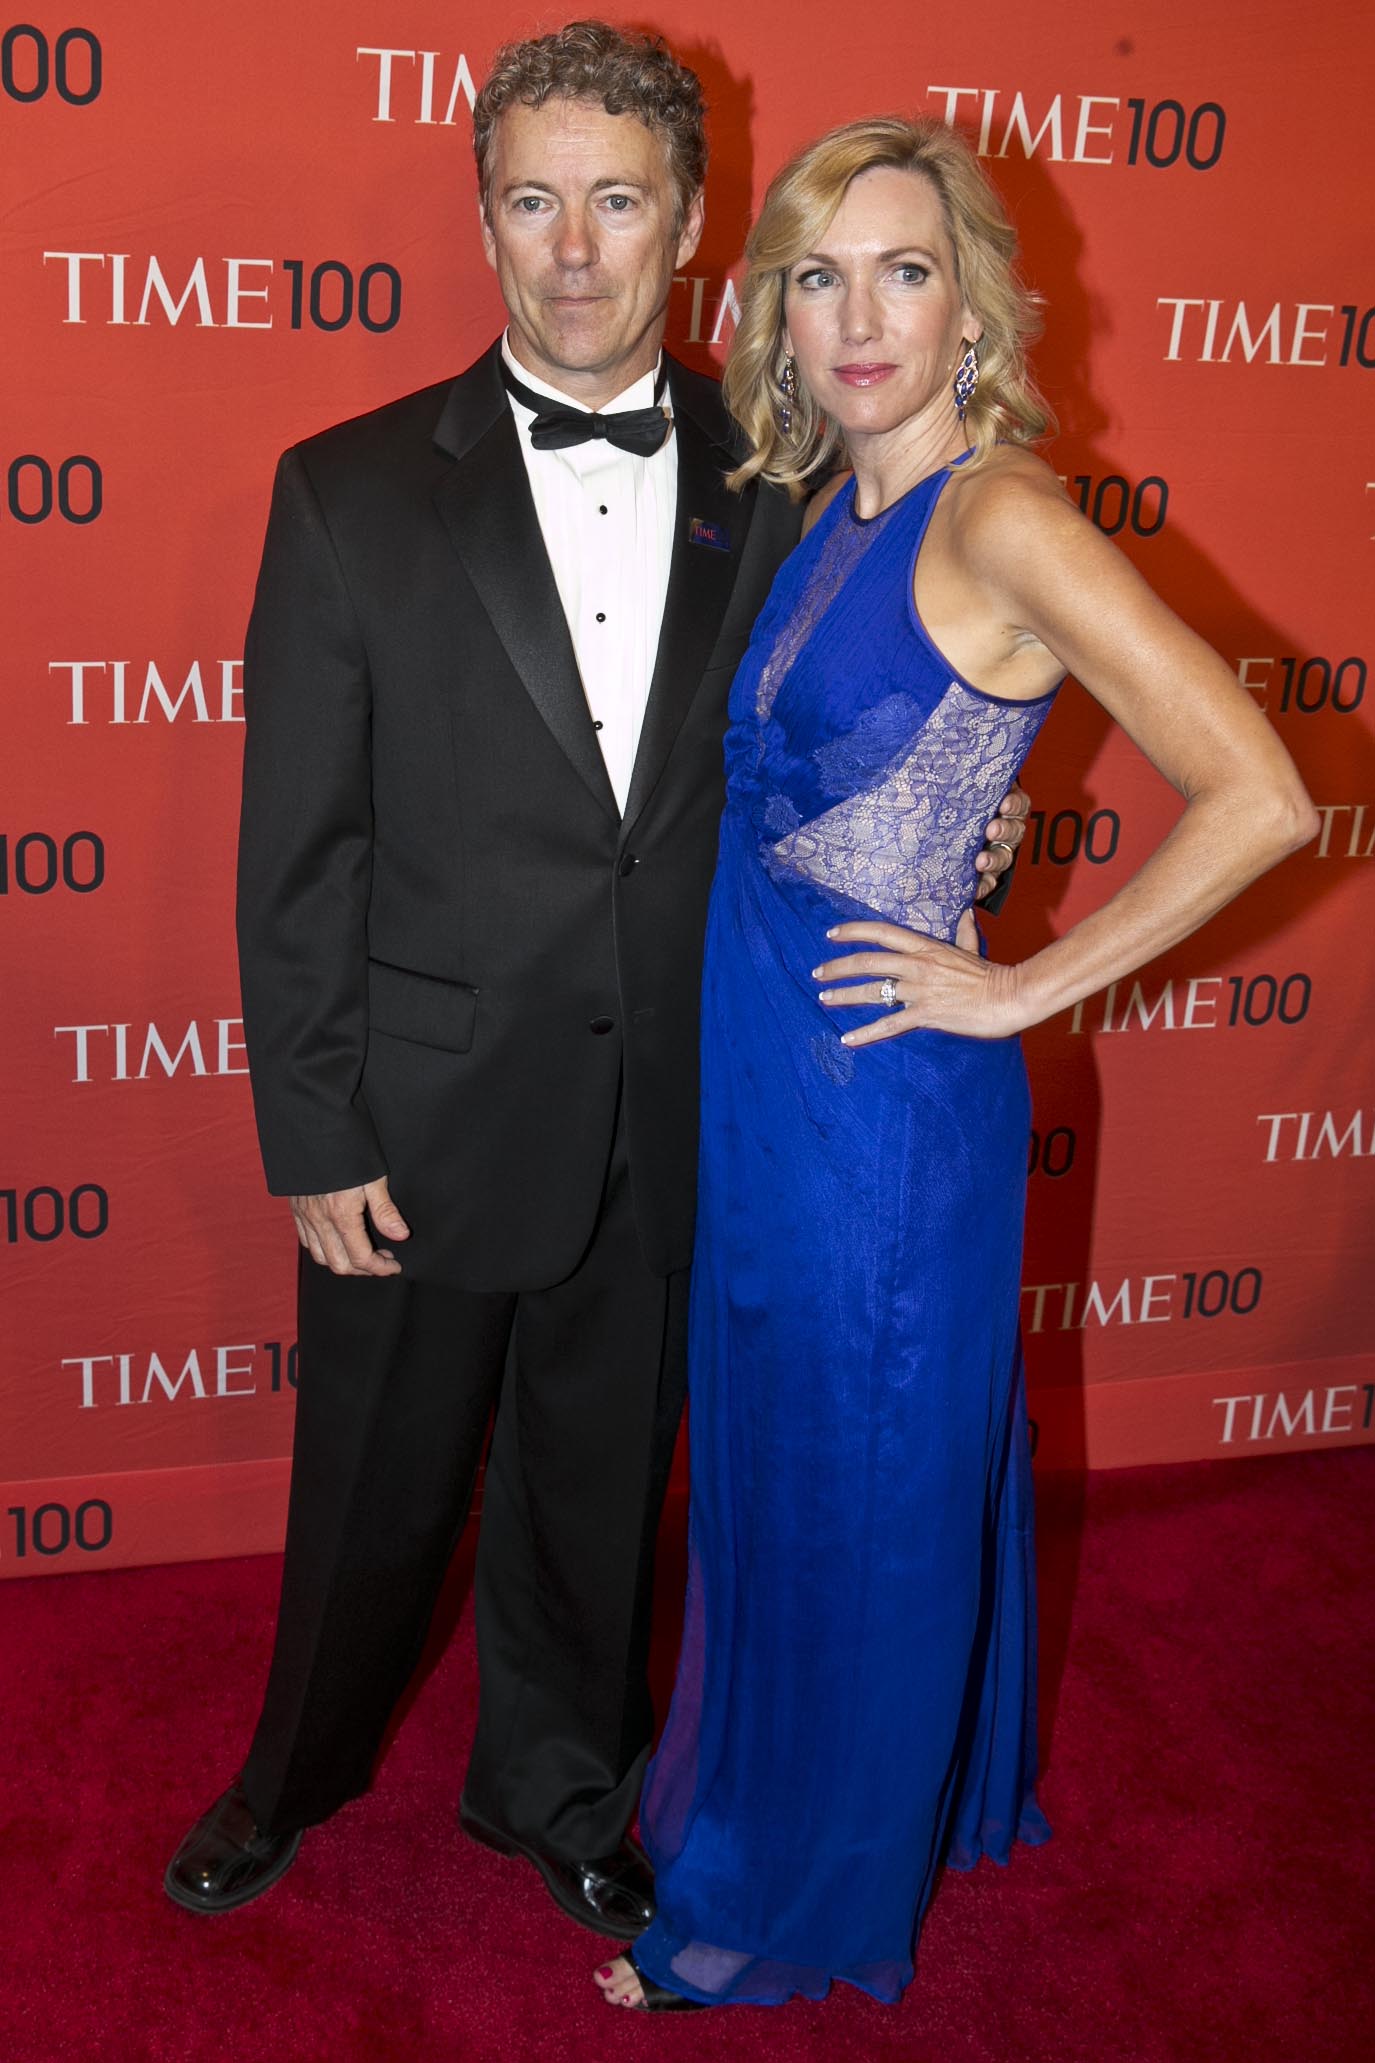 Rand Paul and Kelley Ashby at the Time 100 Gala at Jazz at Lincoln Center in New York City on April, 29, 2014 (Jonathan D. Woods for TIME)